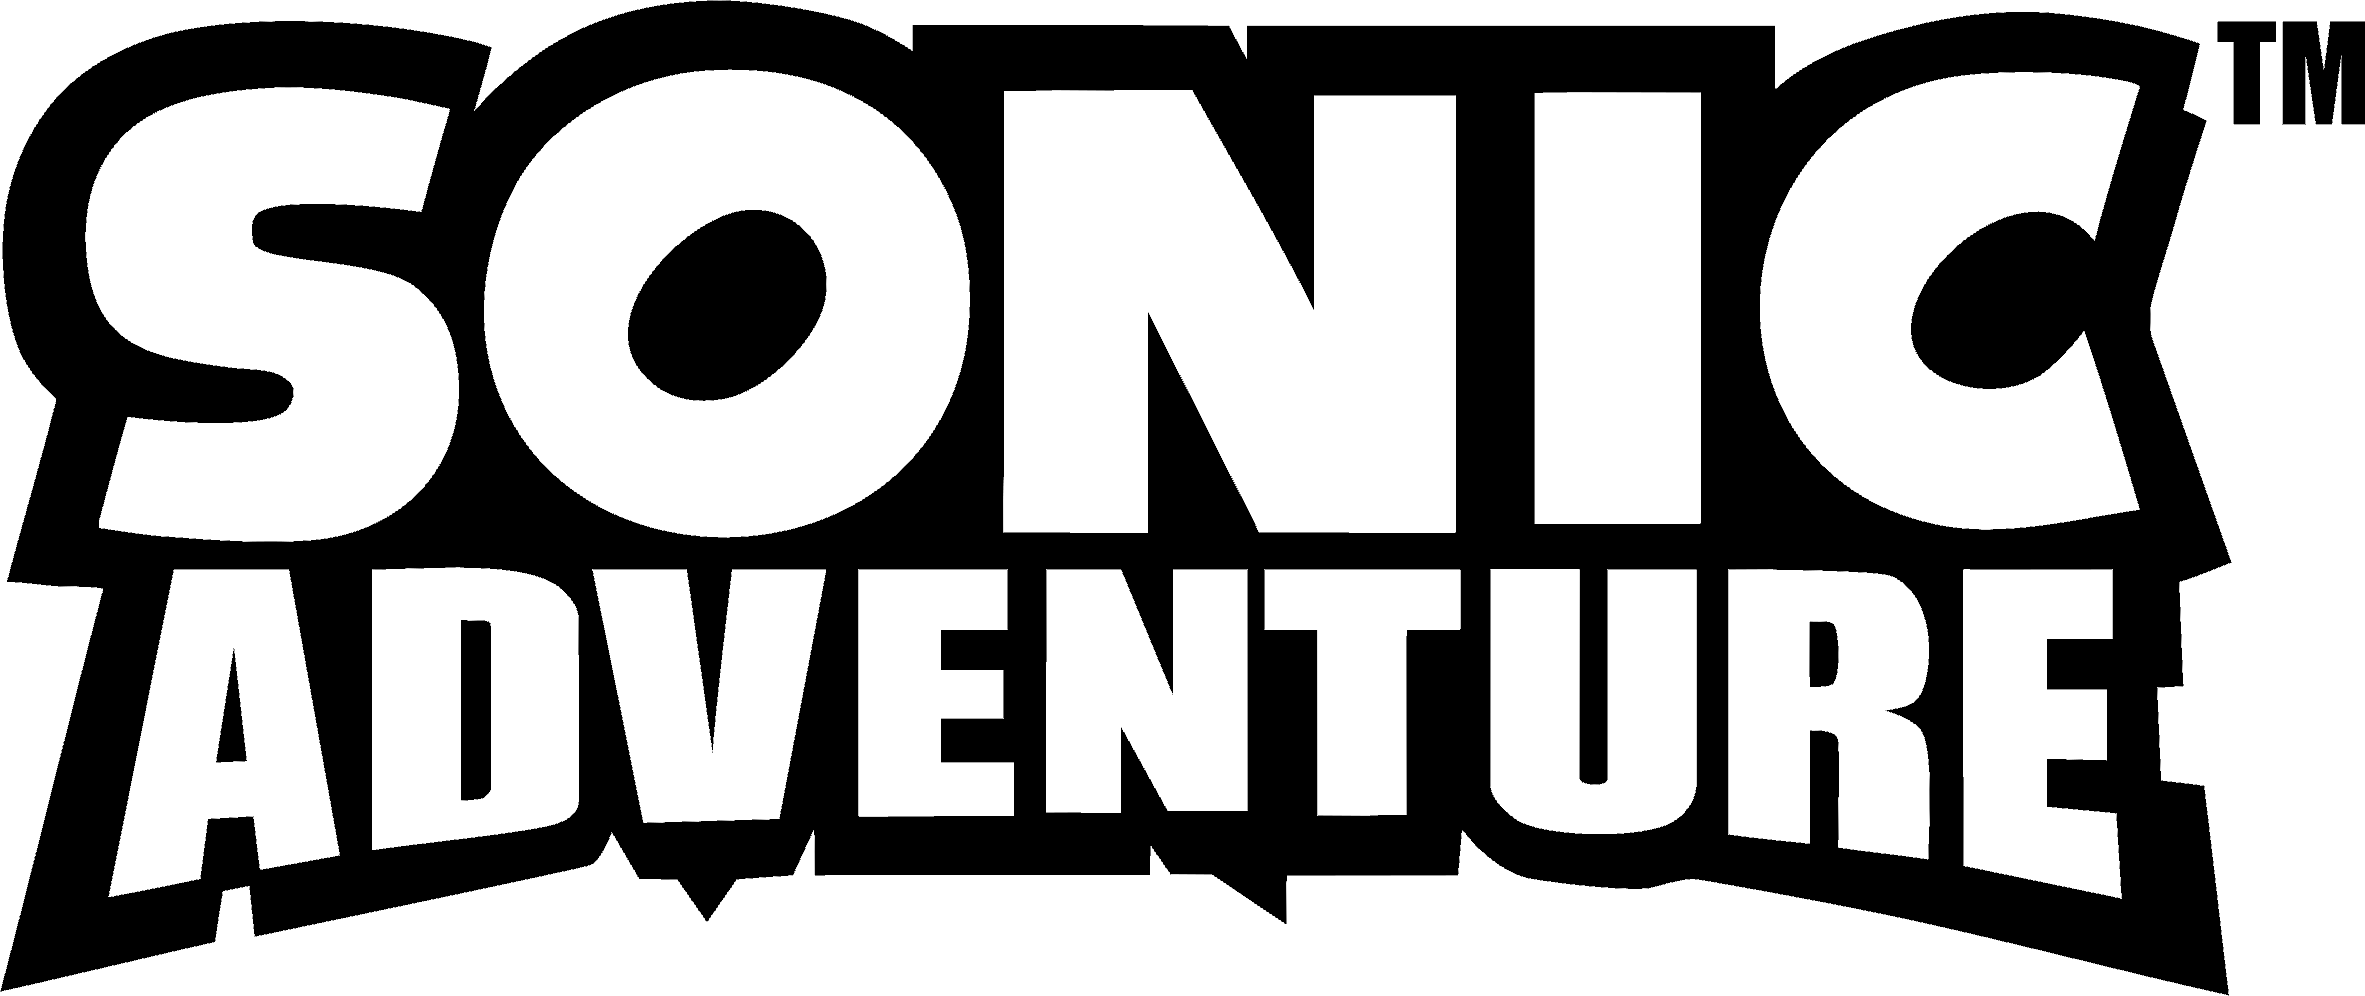 Dribbble - adventure-logo.png by Mohammad Anis